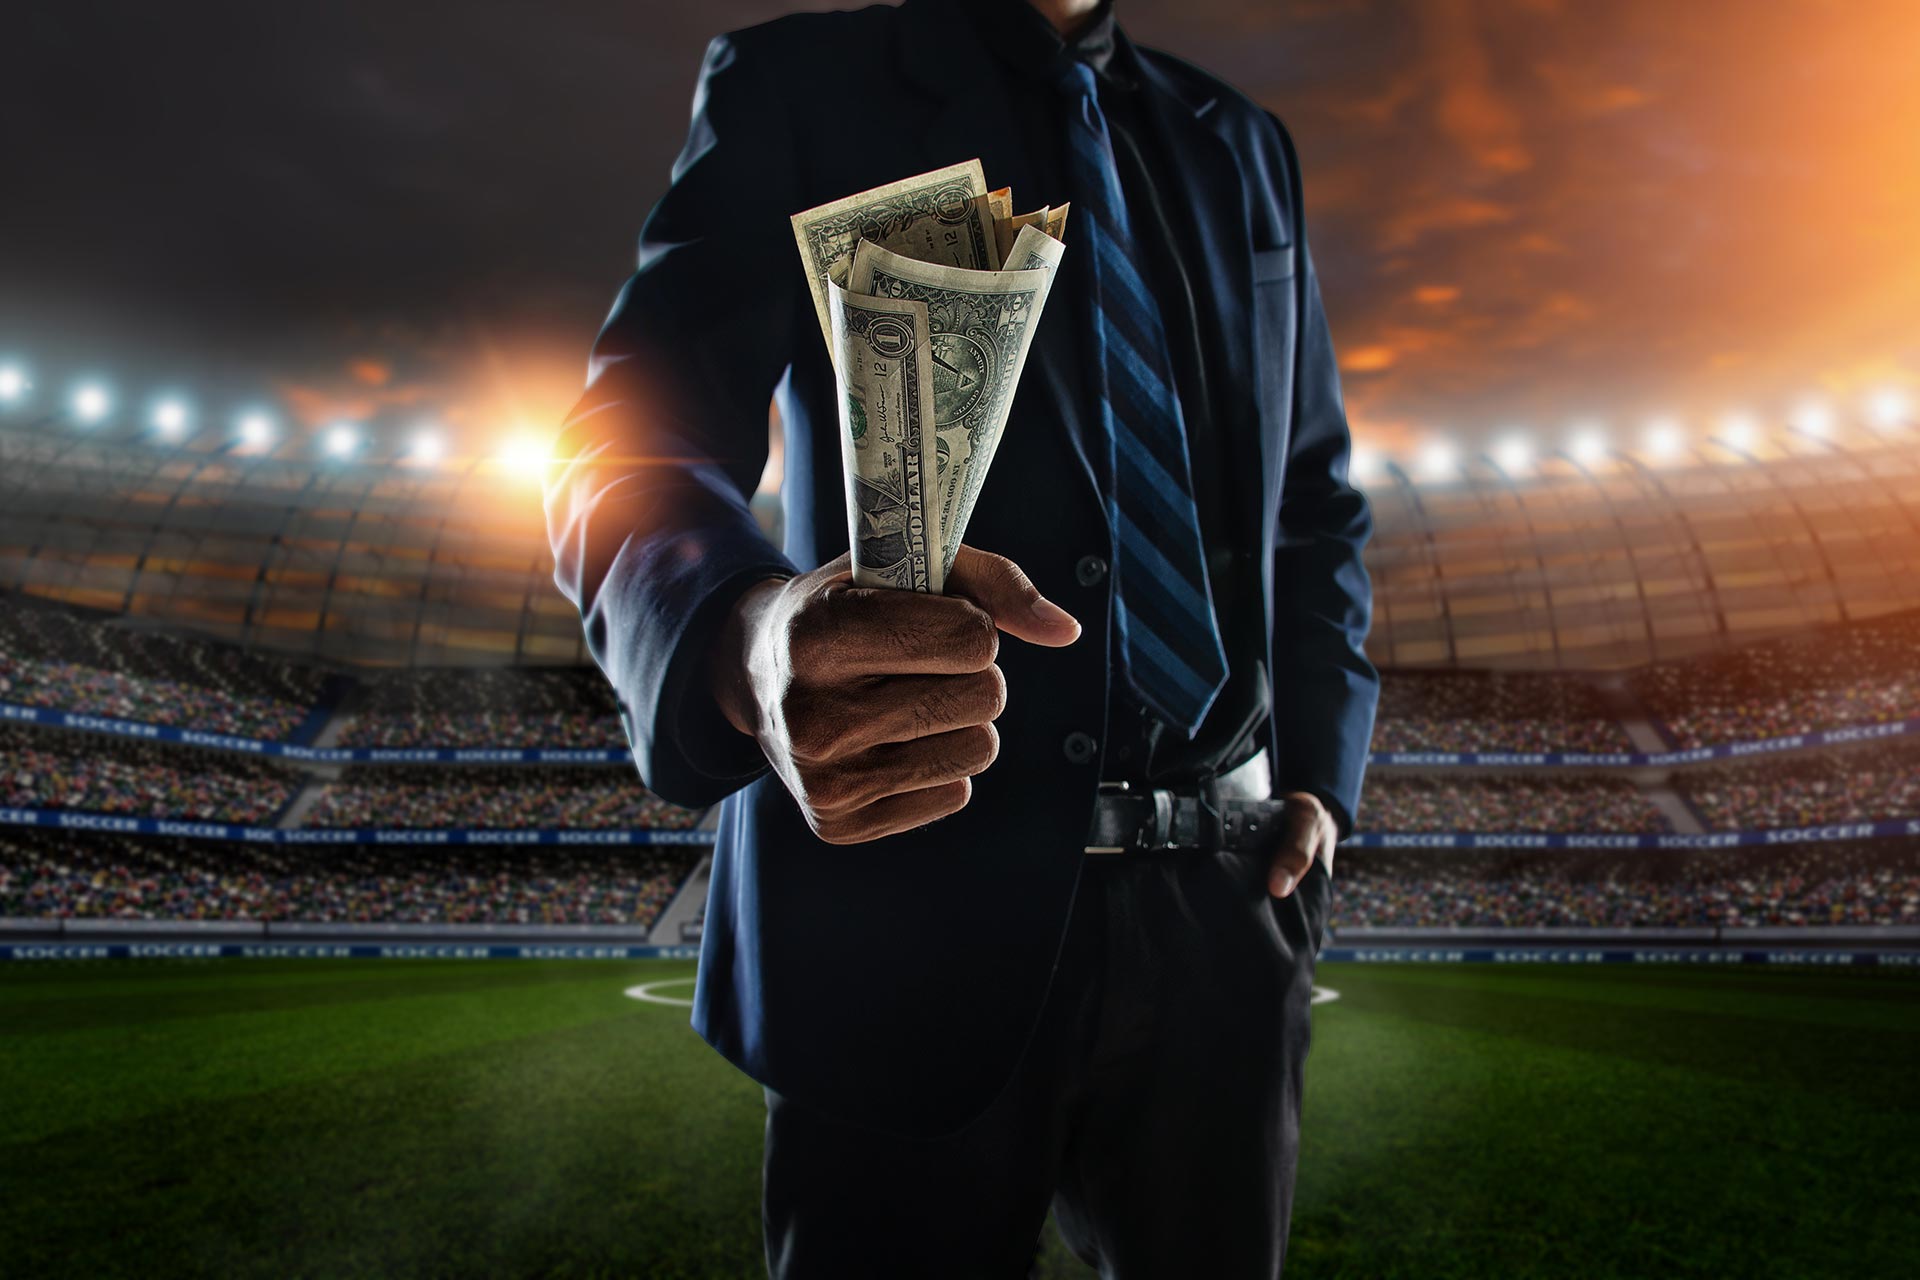 Online sports betting legal in ny song how do odds in sports betting work